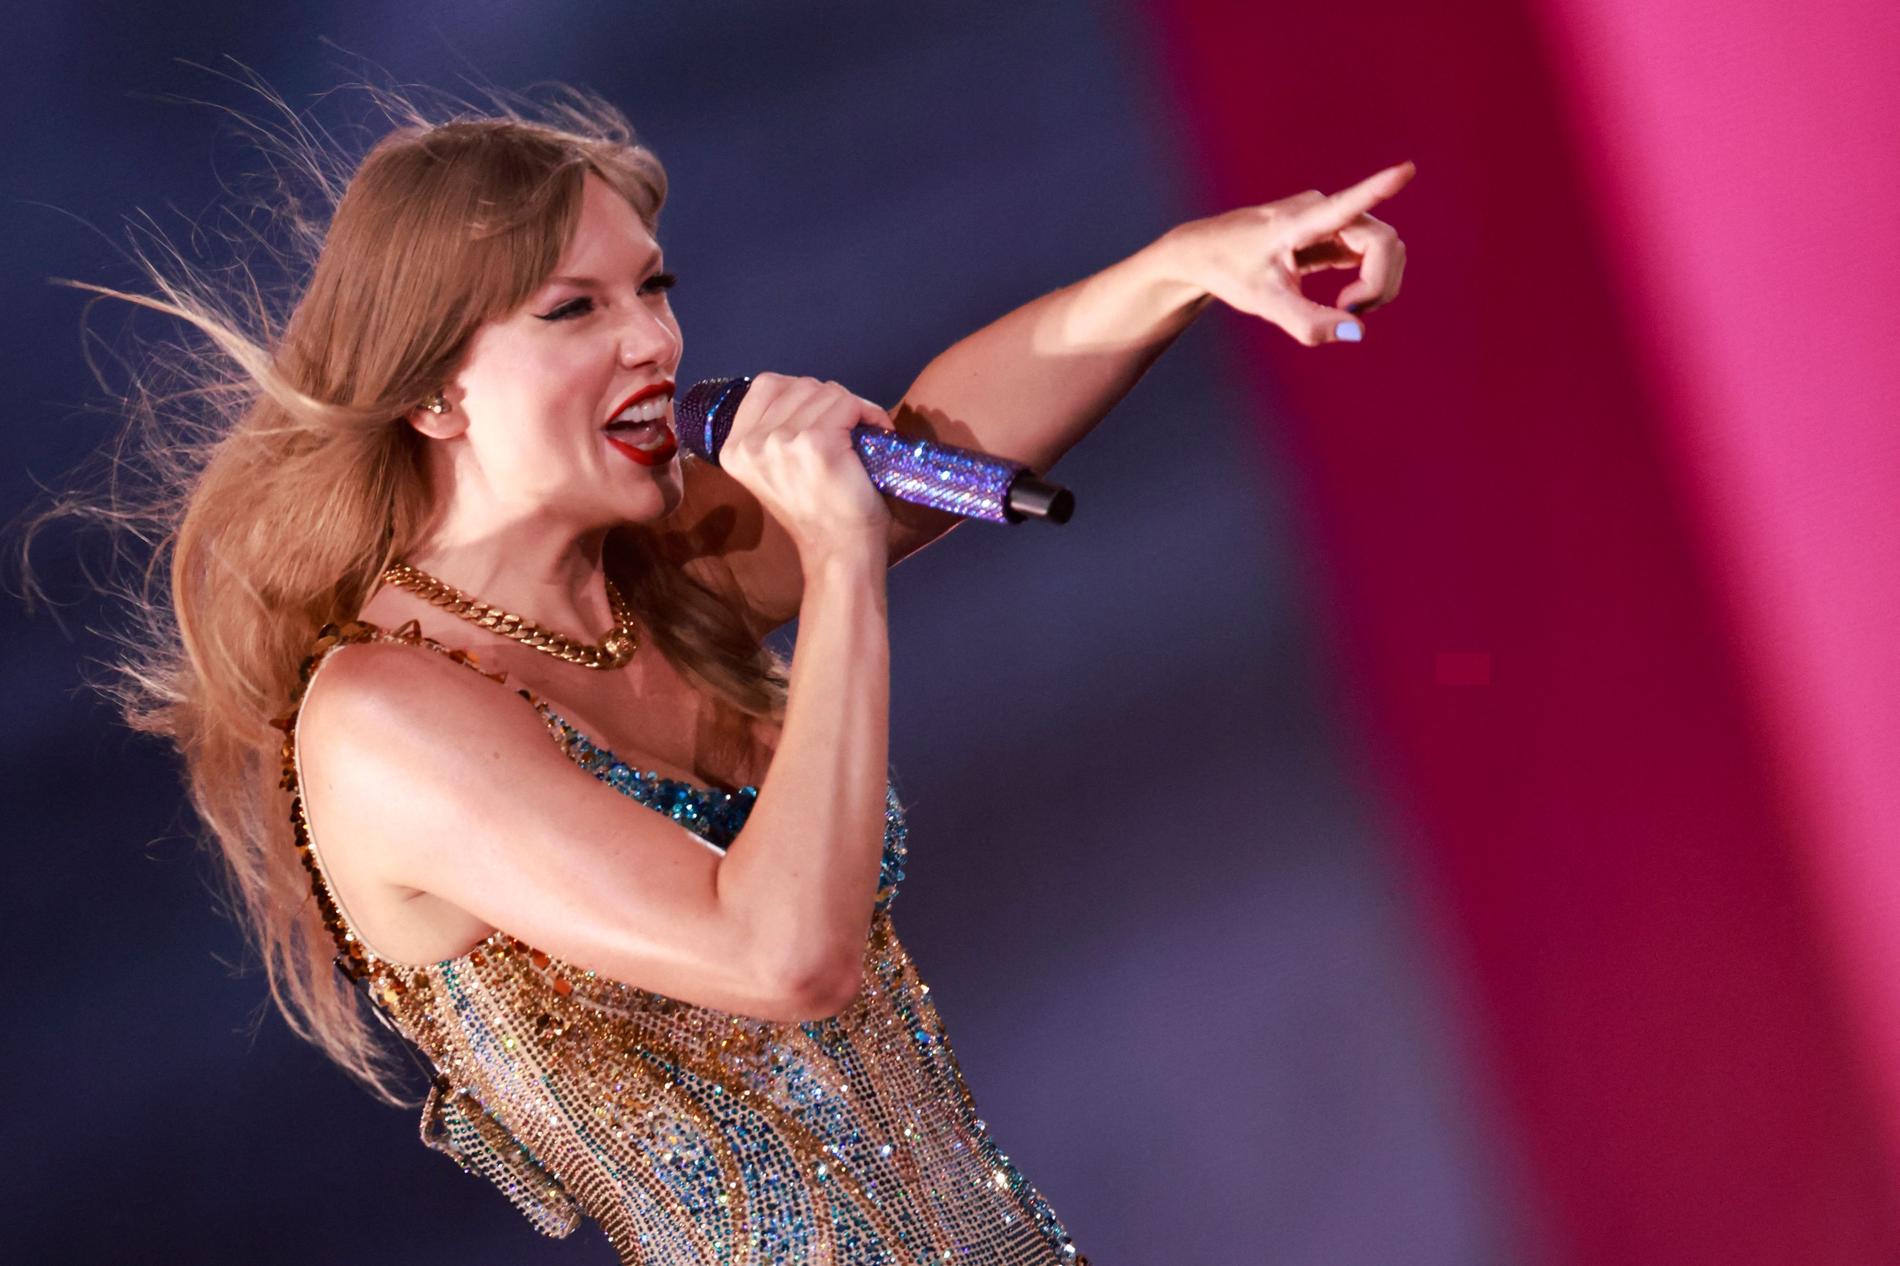 World Star: Those who didn't get a chance to see Taylor Swift live during her tour, at least have the chance to watch the concert recorded in the concert film 